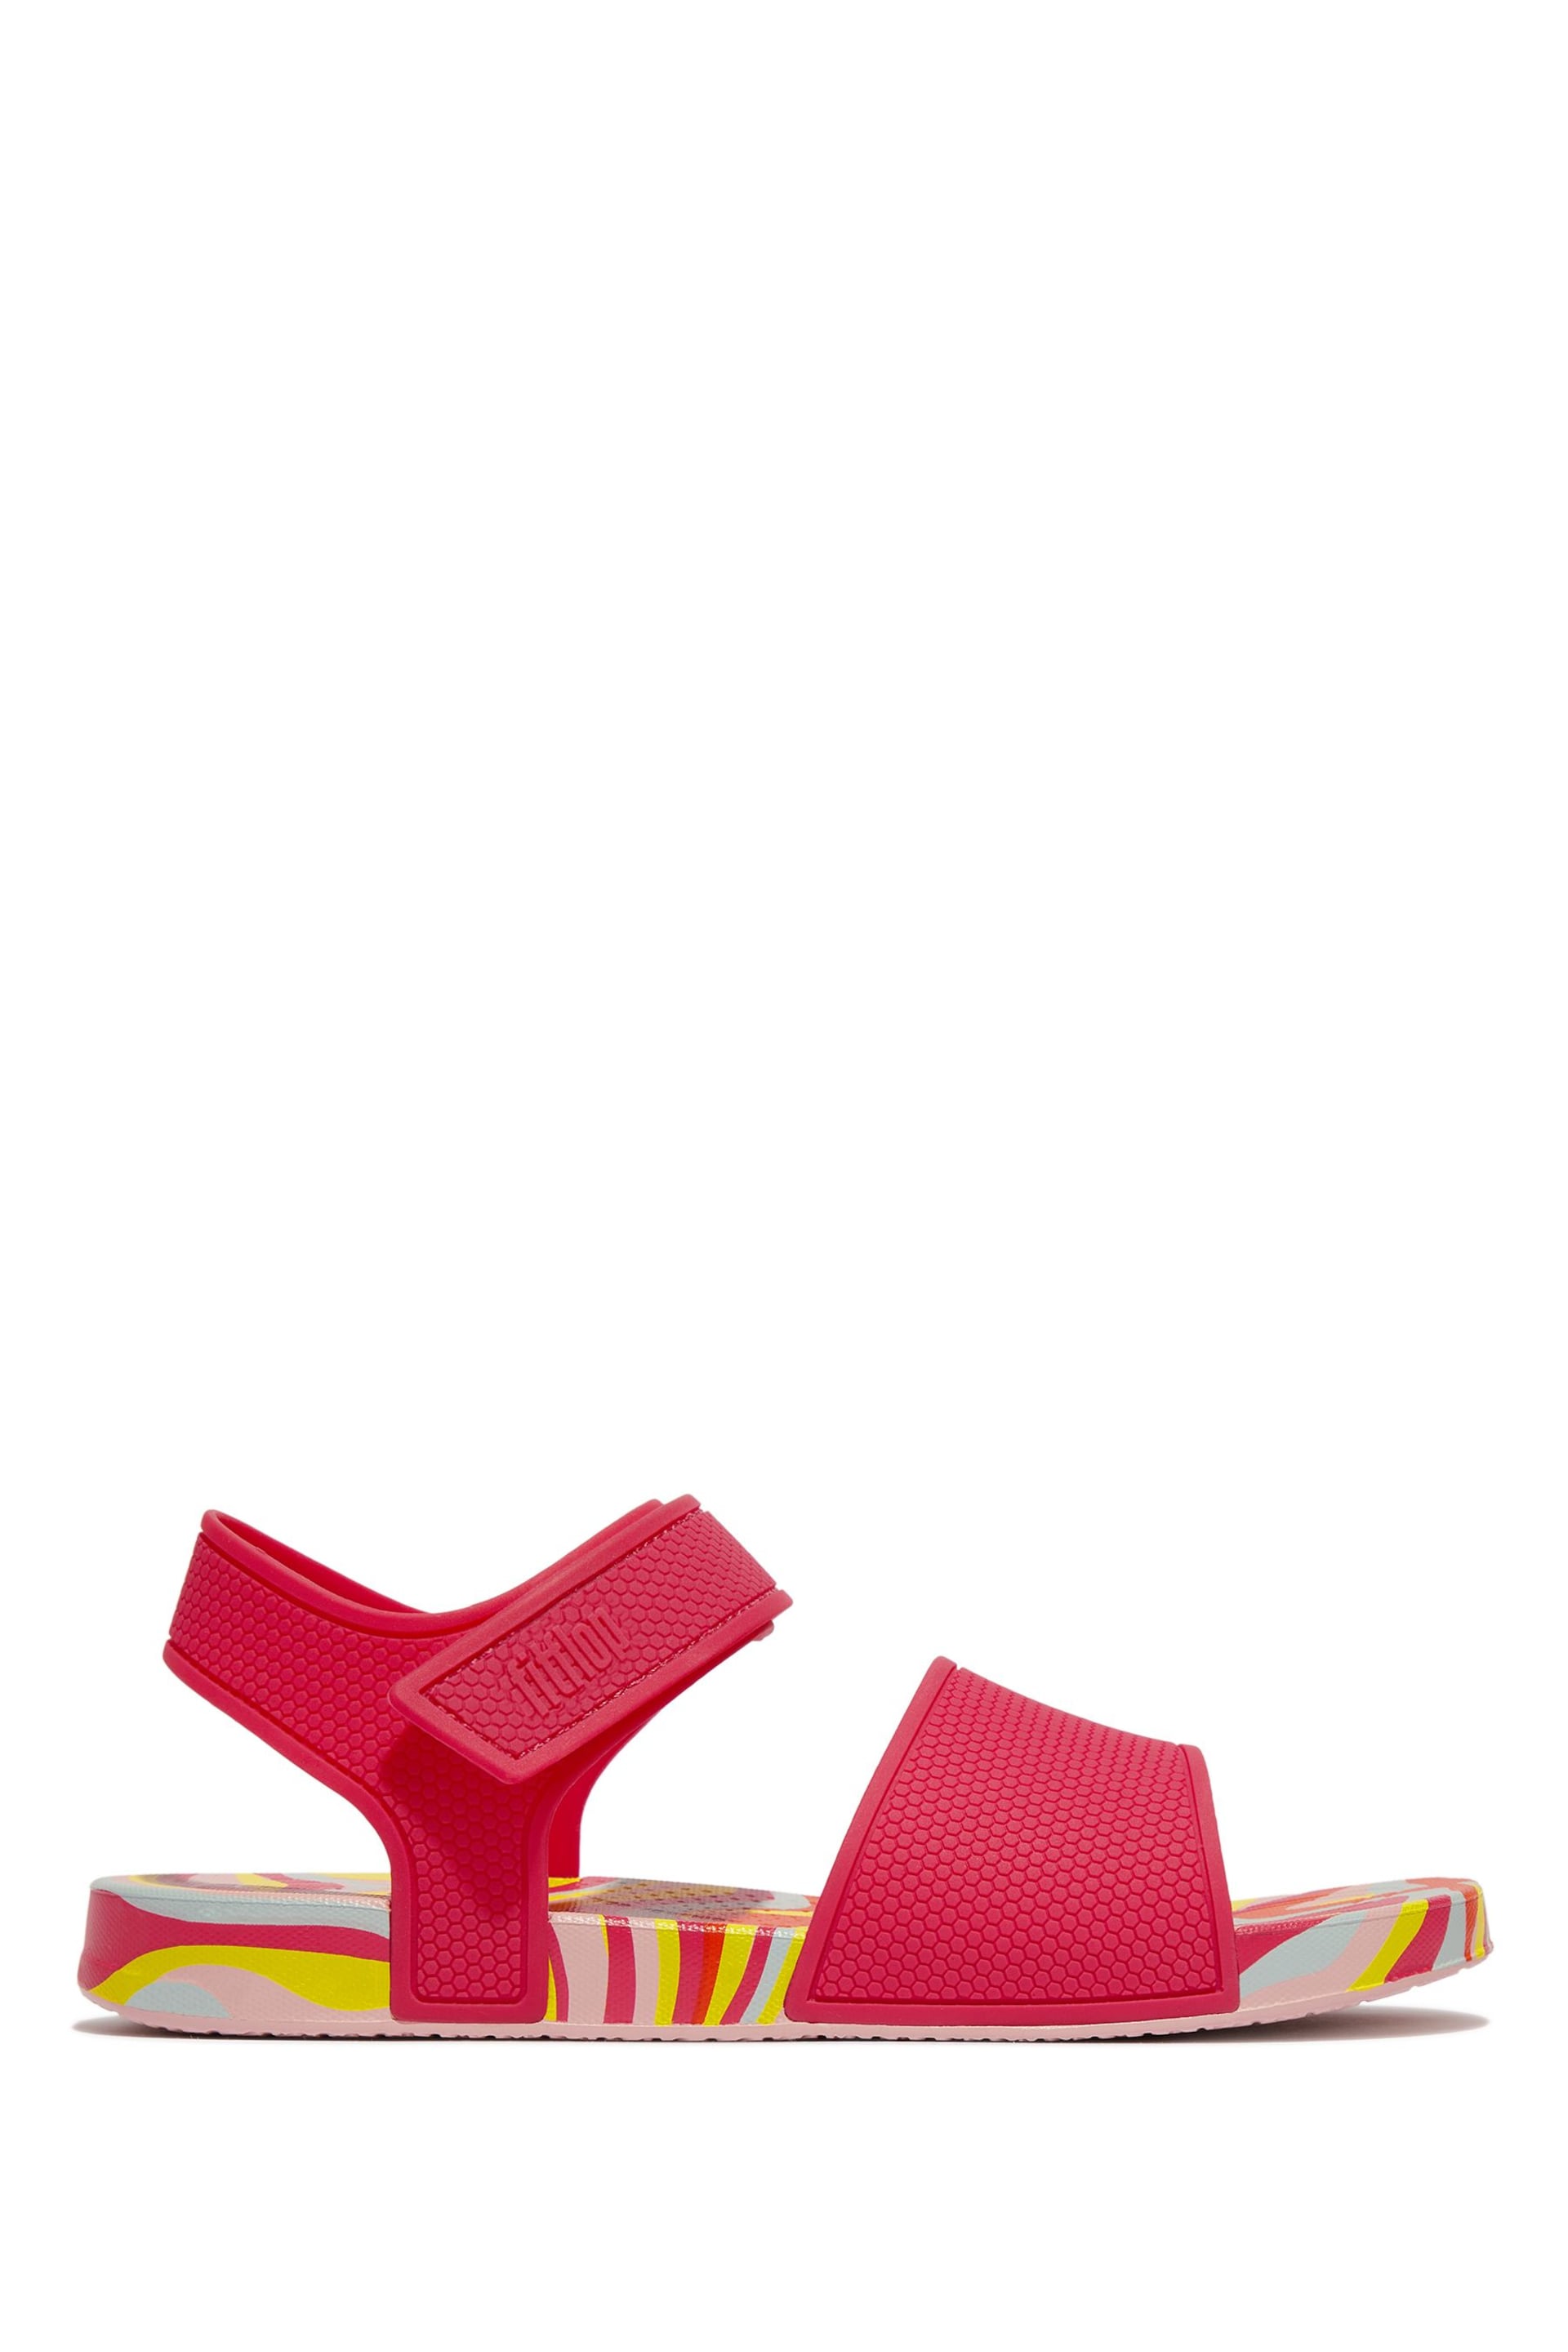 FitFlop Red Kids Iqushion Junior Swirly Ergonomic B/S Sandals - Image 3 of 5